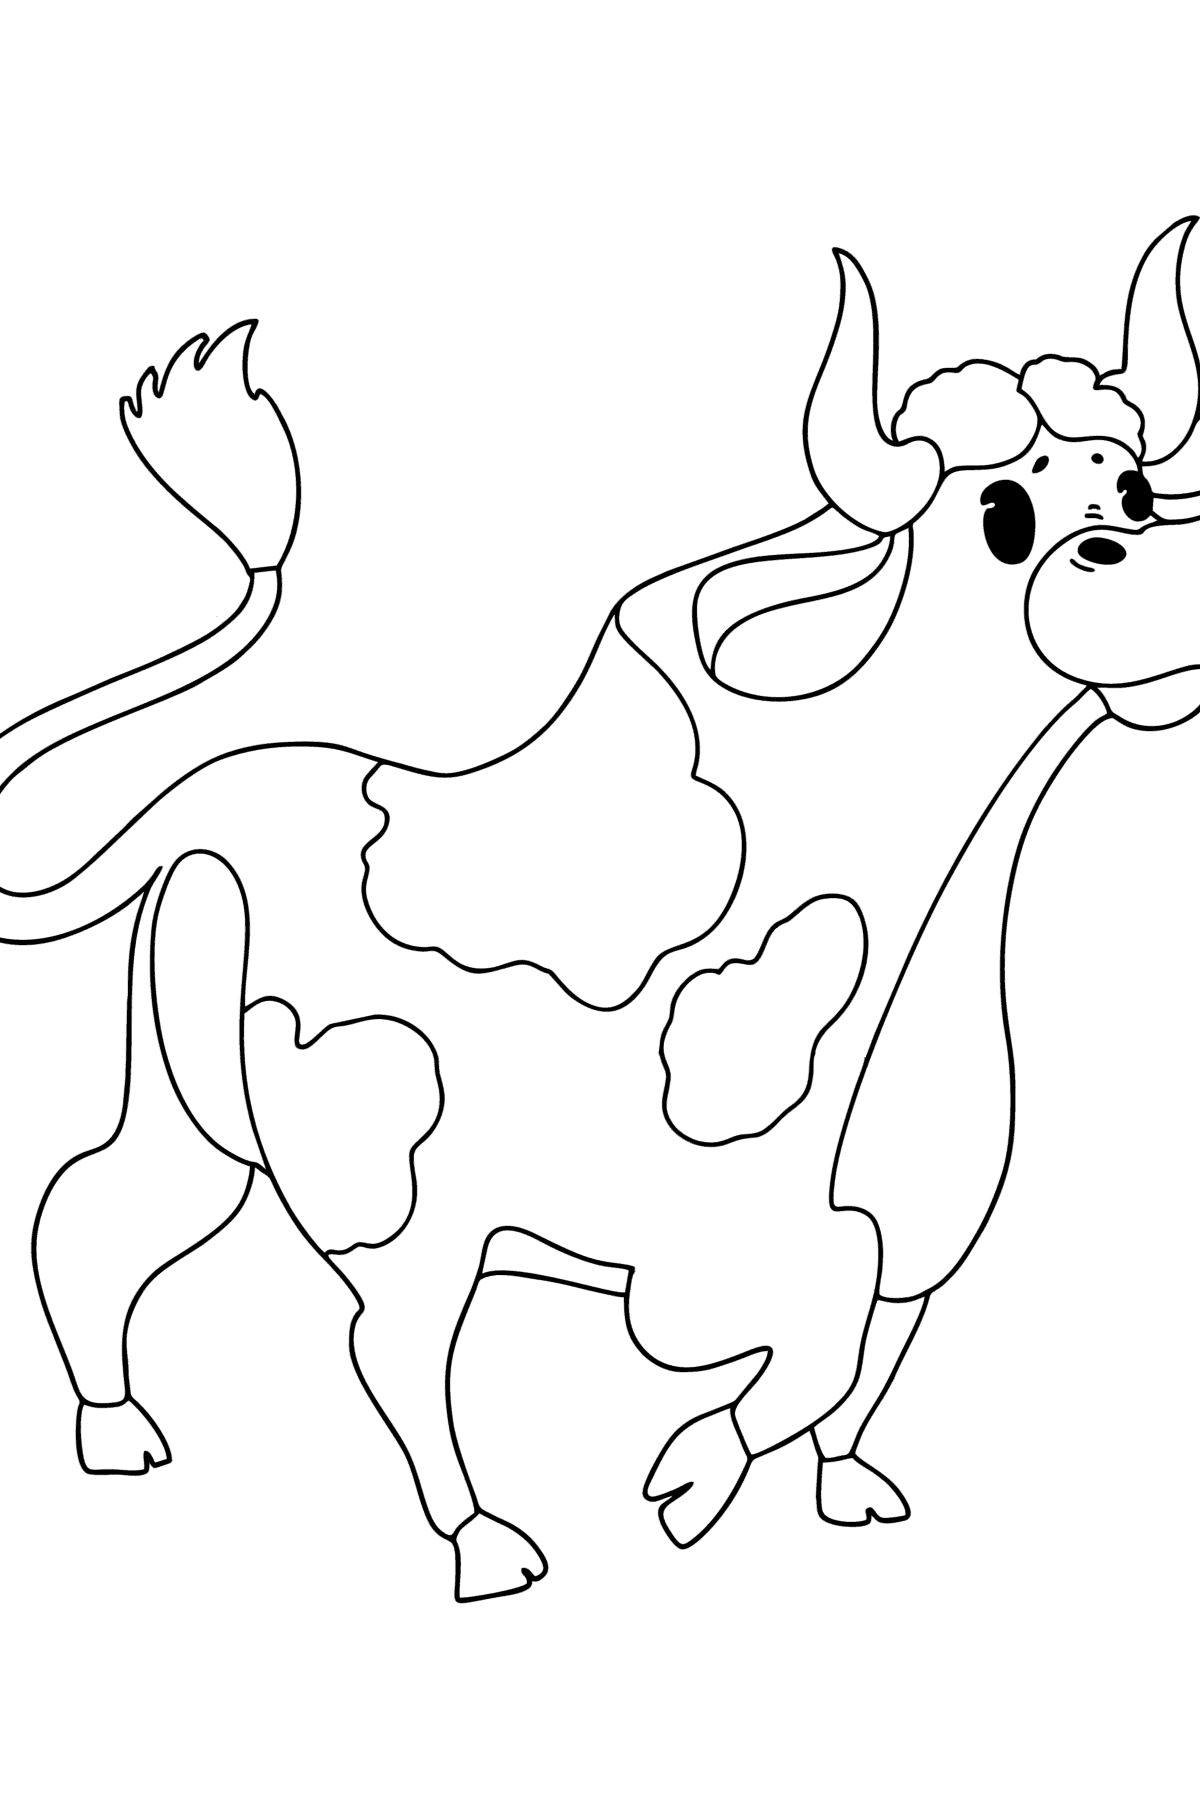 Bull drawing Coloring page - Coloring Pages for Kids